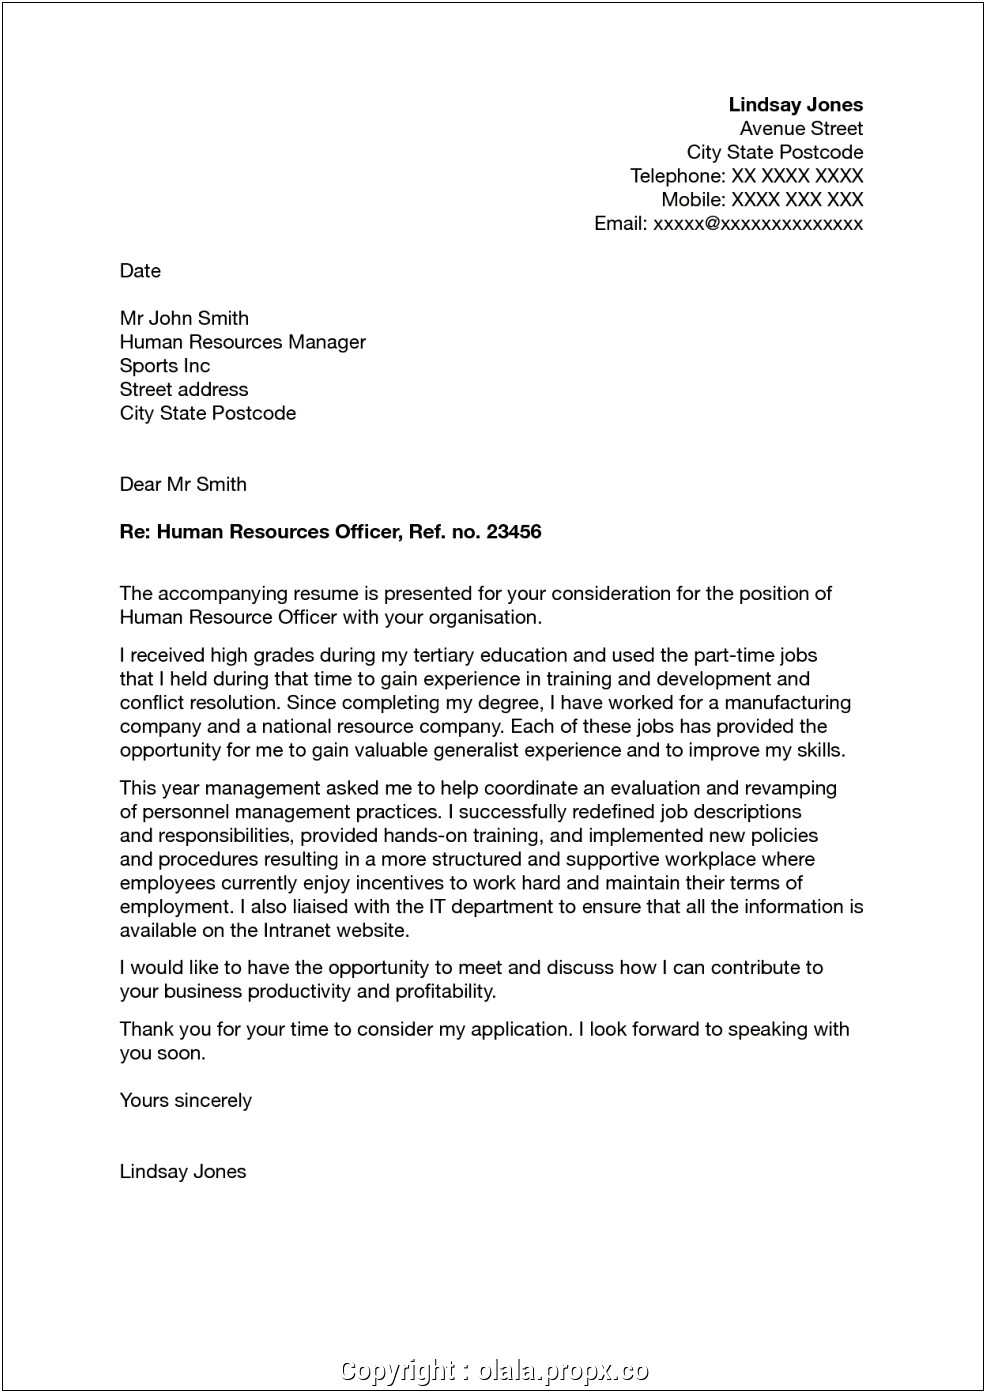 Addressing Cover Letter Resume Human Resources